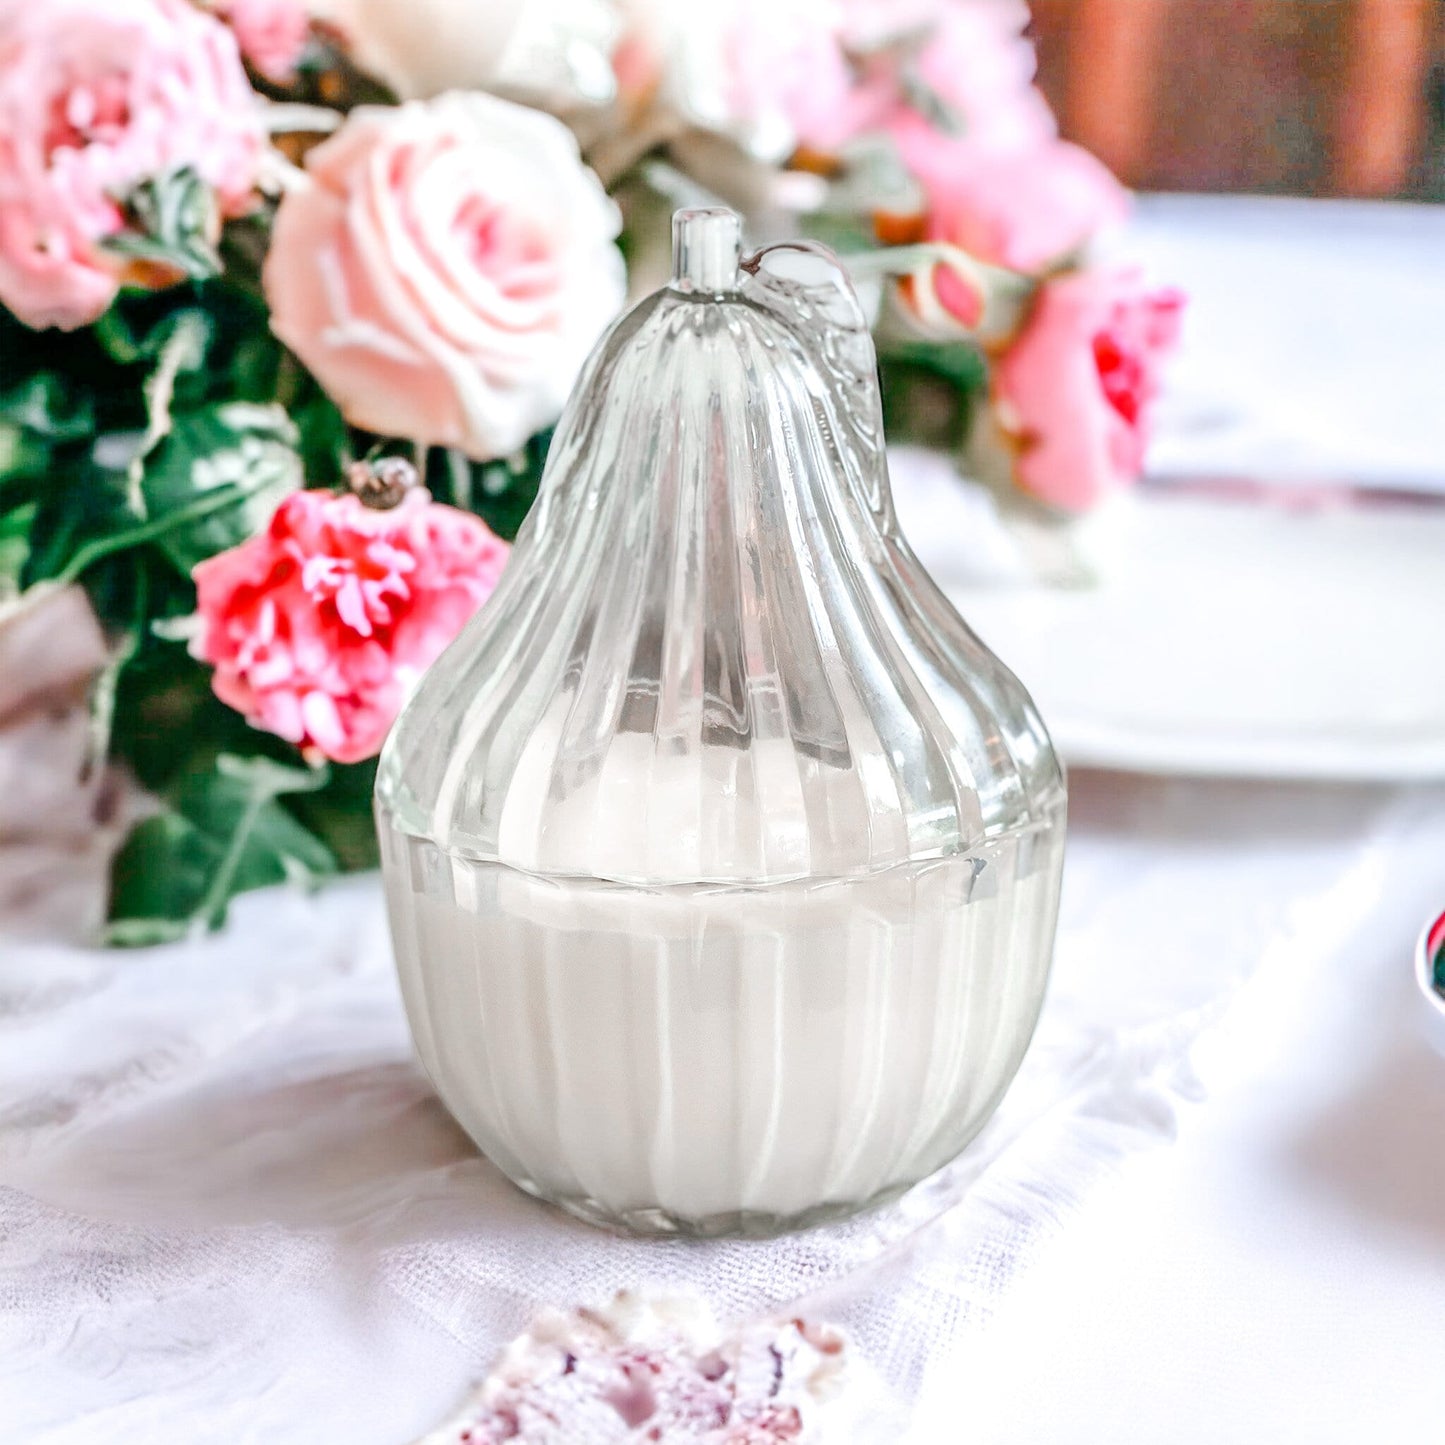 Scented Candle in Vintage Pear Covered Dish